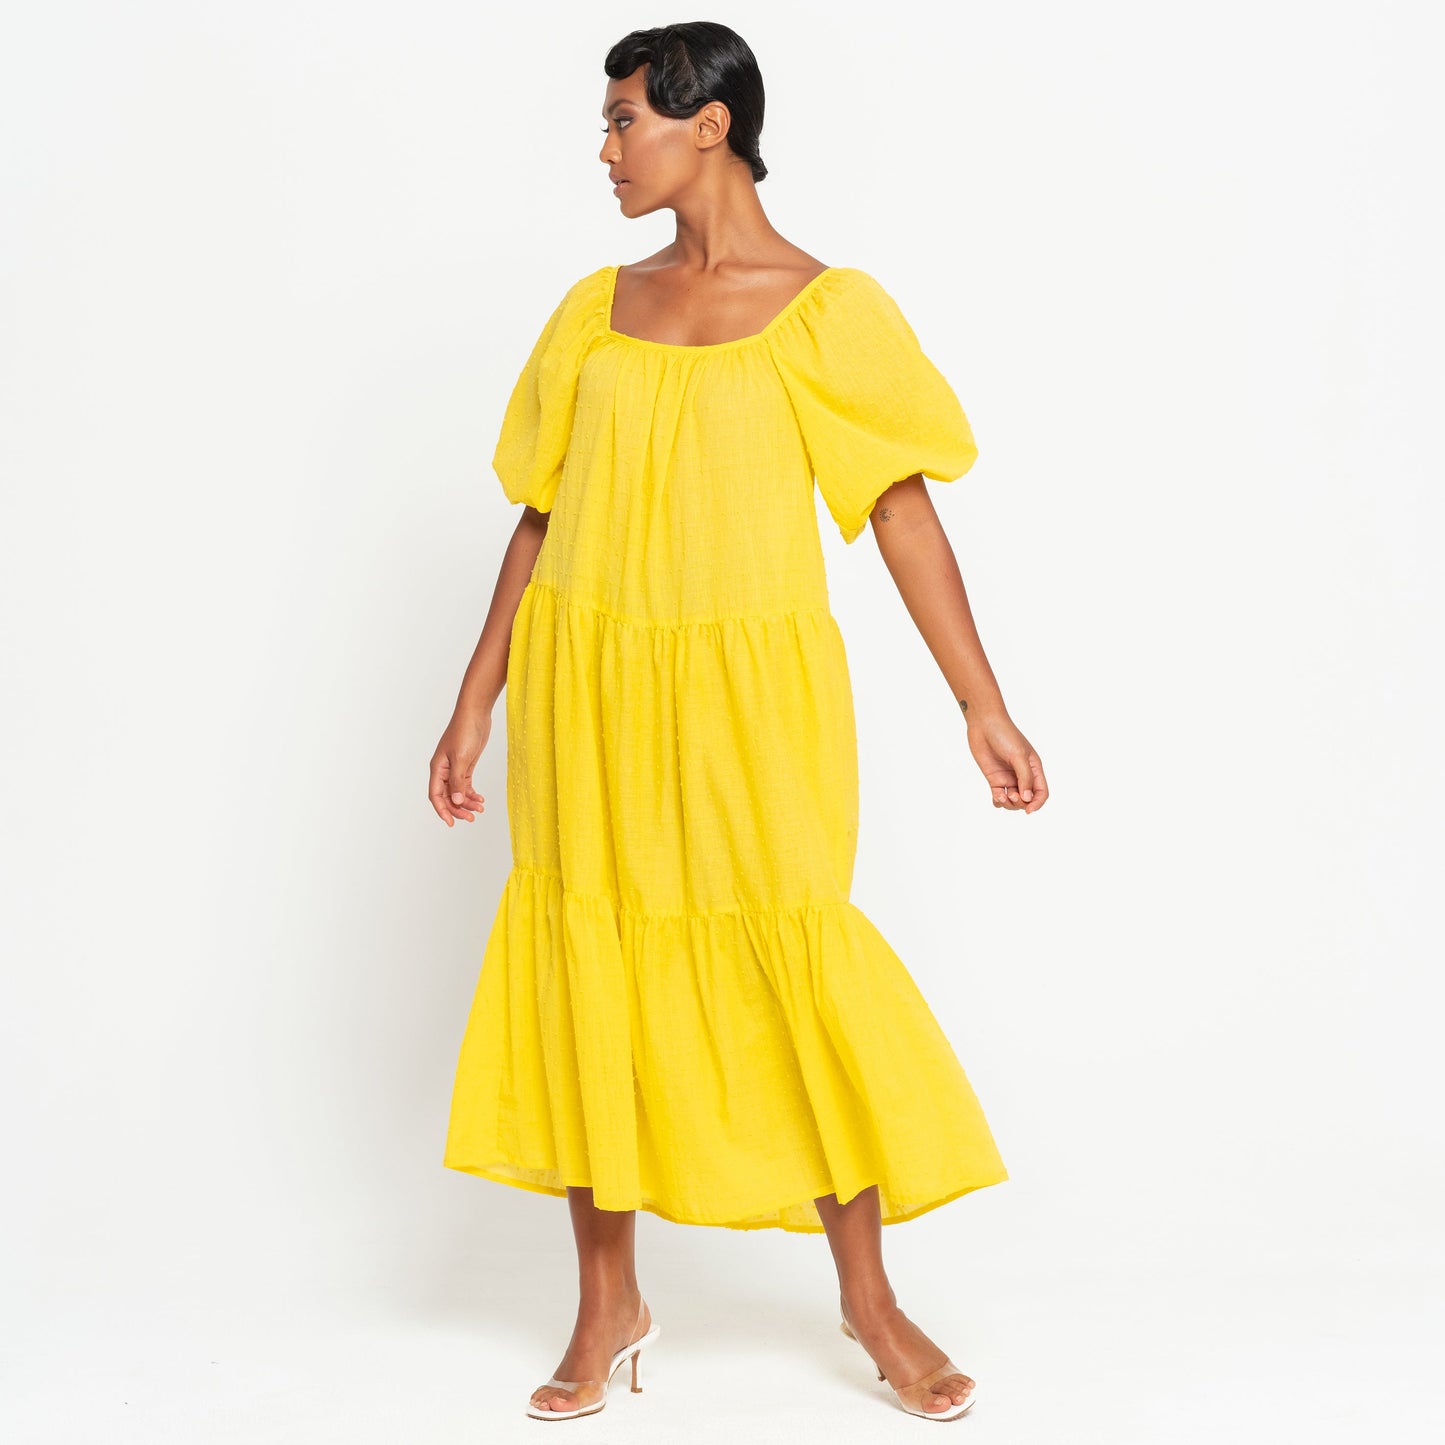 ROSEMARY Dotted Cotton Dress, in Sunflower Yellow